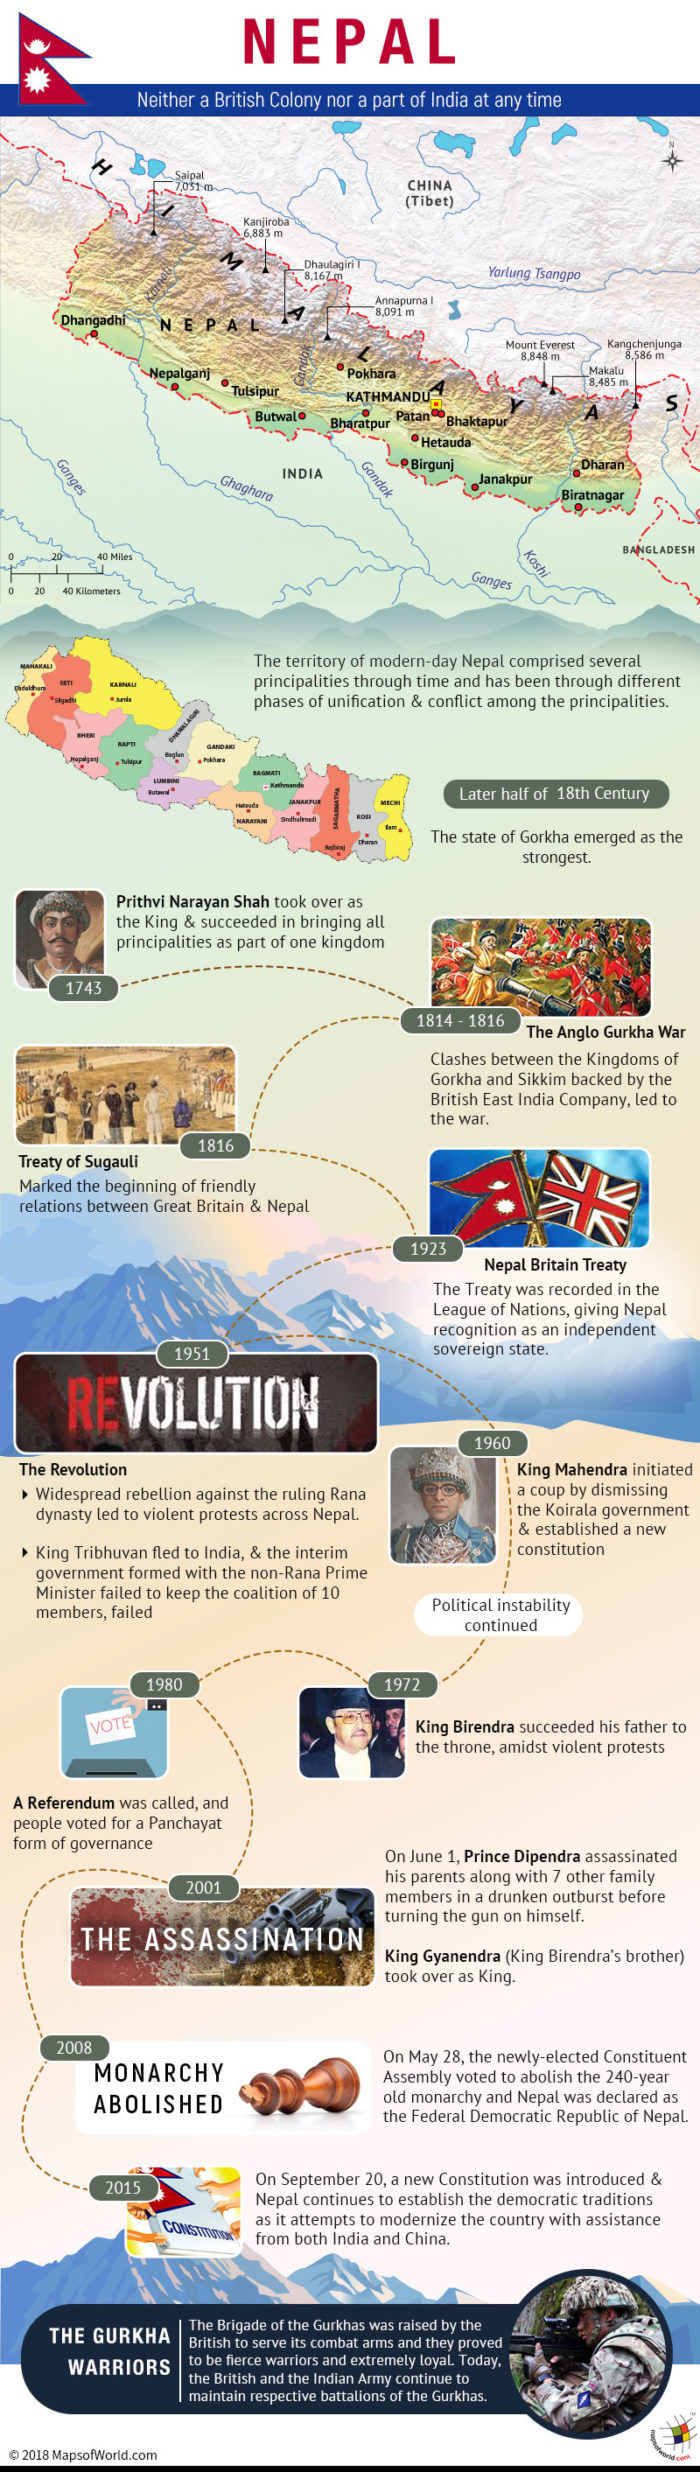 Infographic - Was Nepal ever a part of British Empire or India